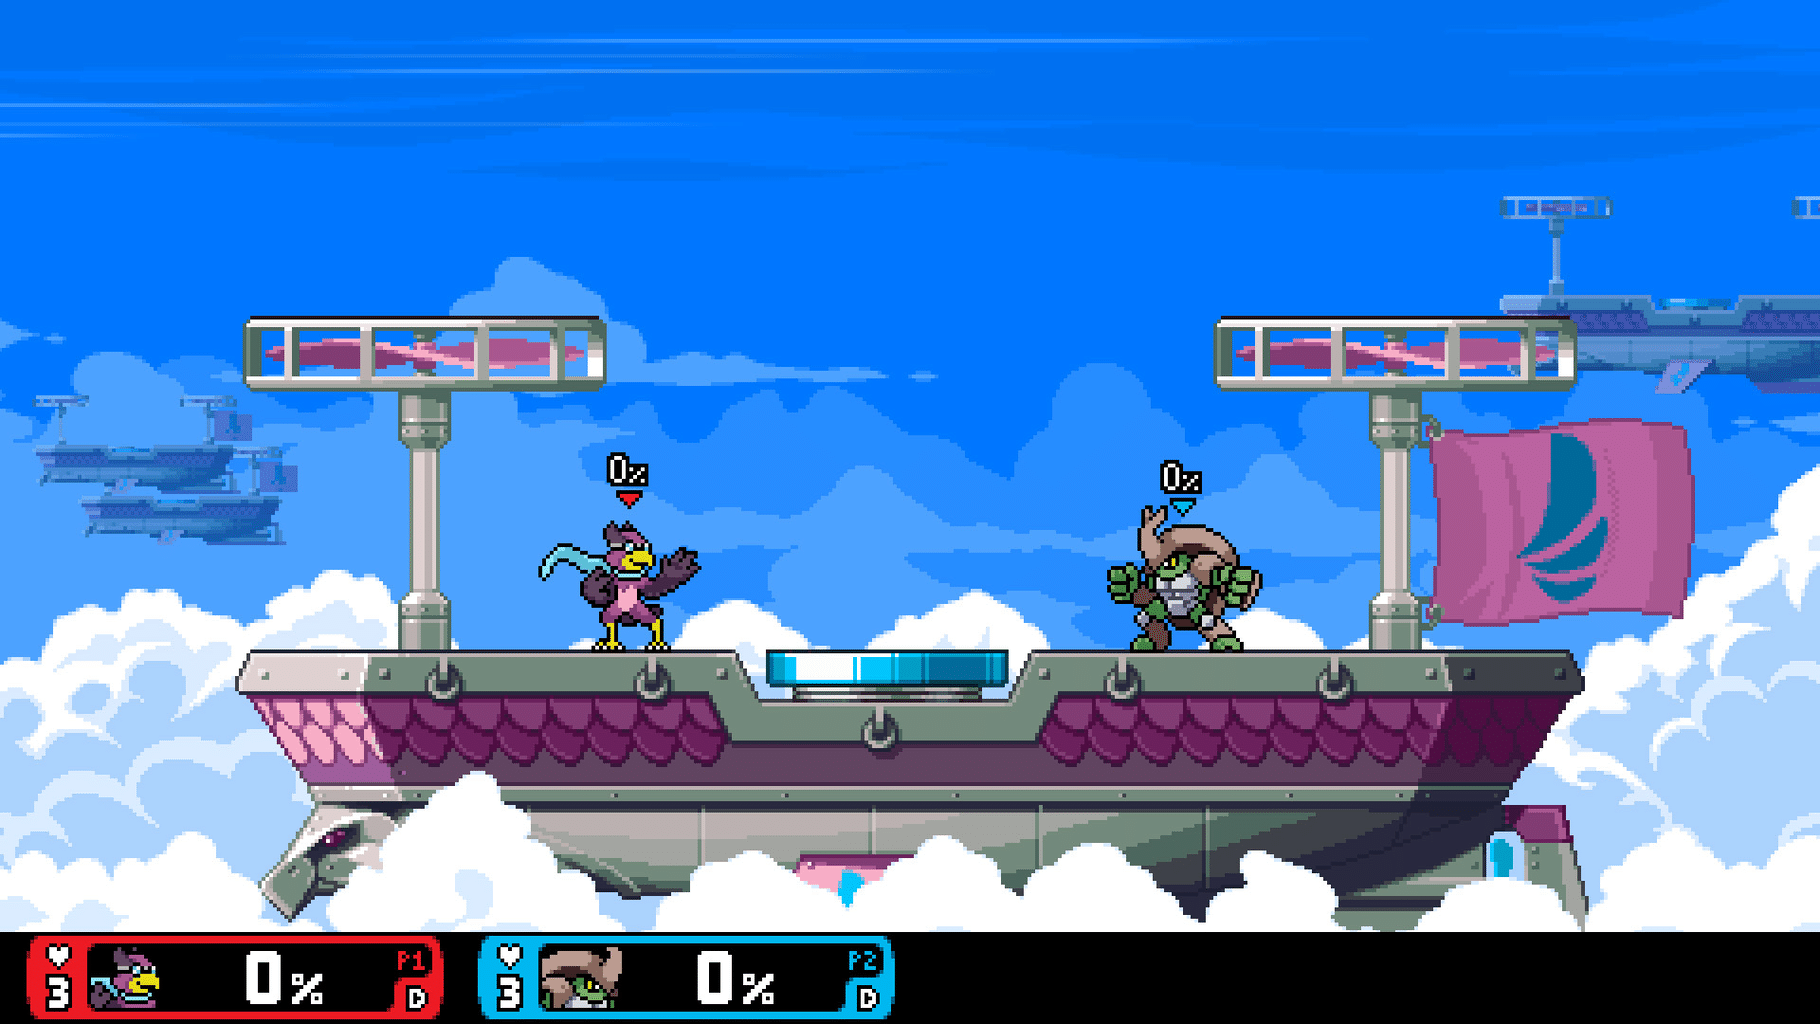 rivals of aether 1.4.13 download free